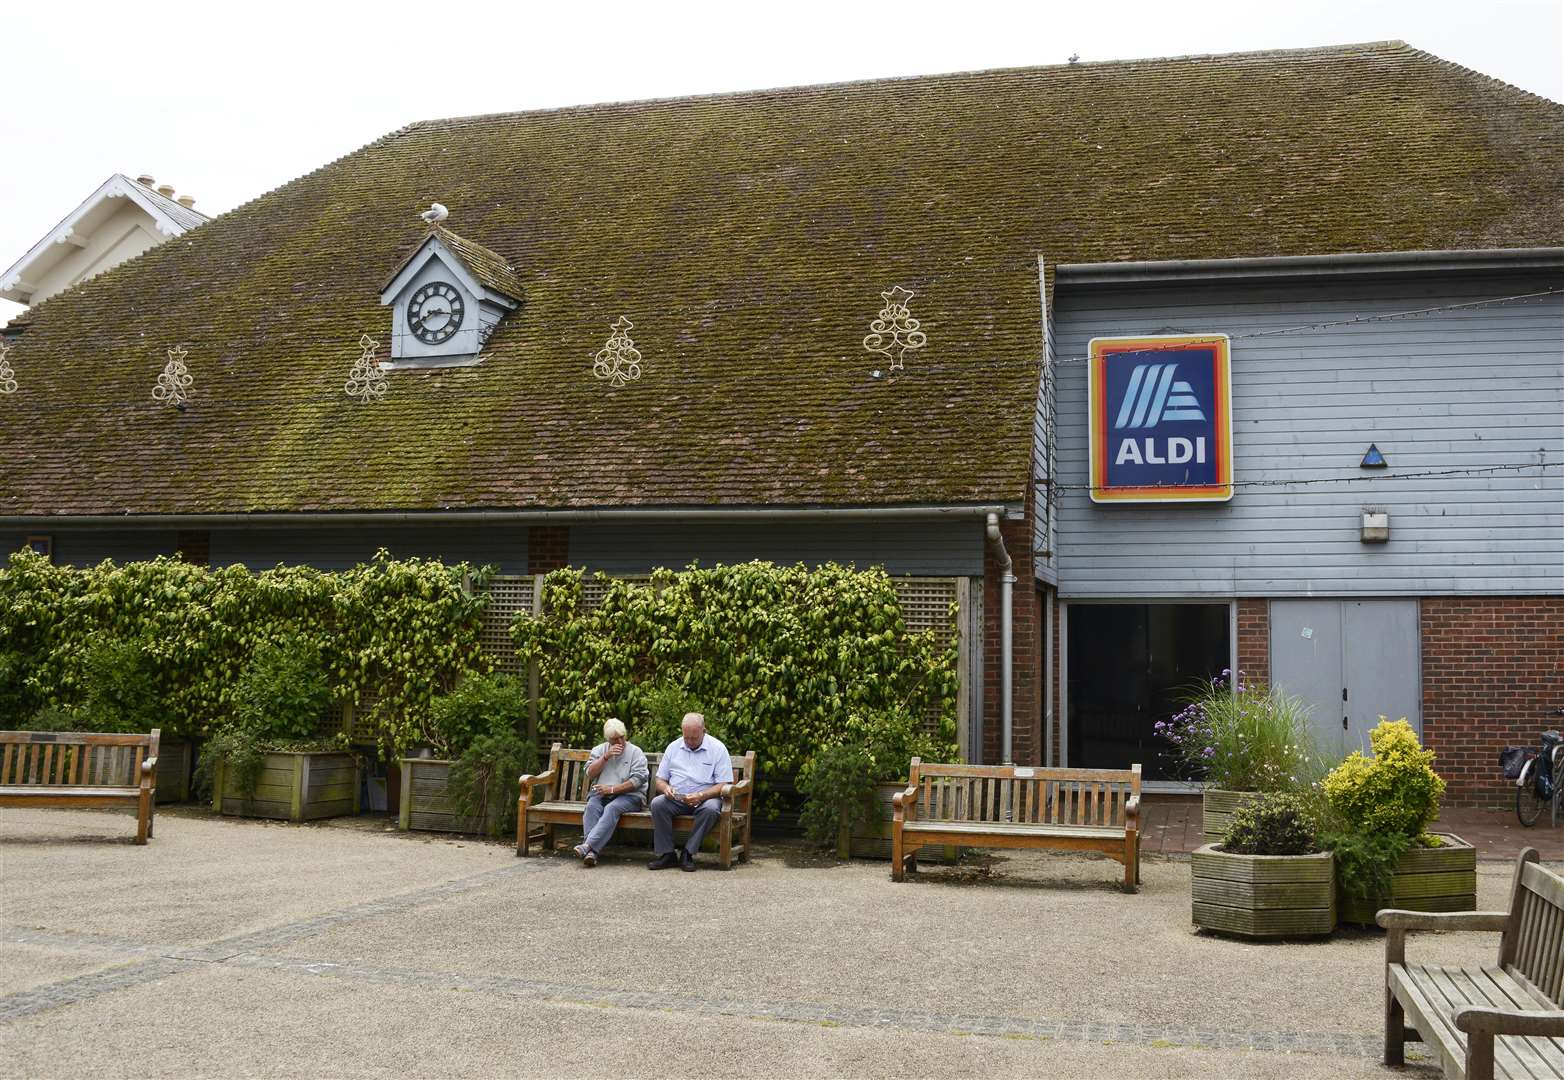 The former Aldi store in Hythe is up for sale